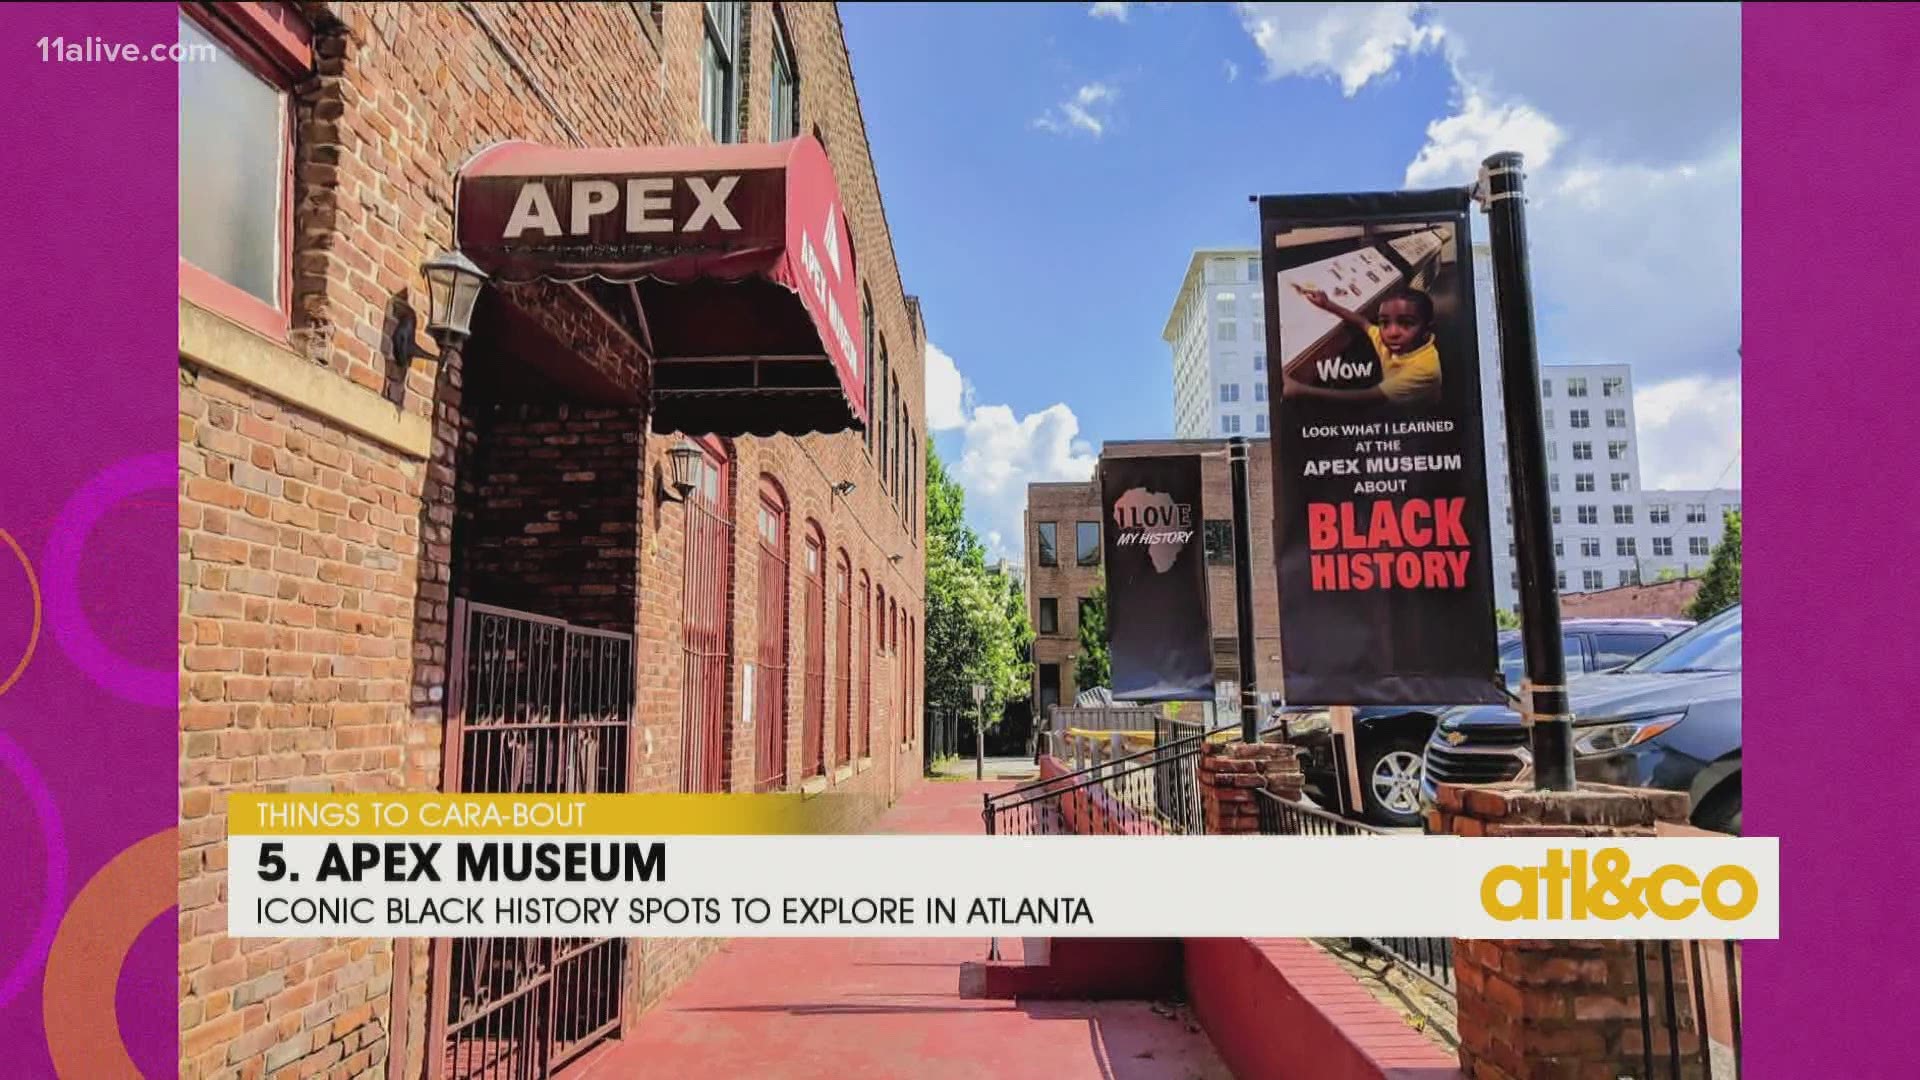 Cara Kneer shares historically important Atlanta places to visit and explore during Black History Month.